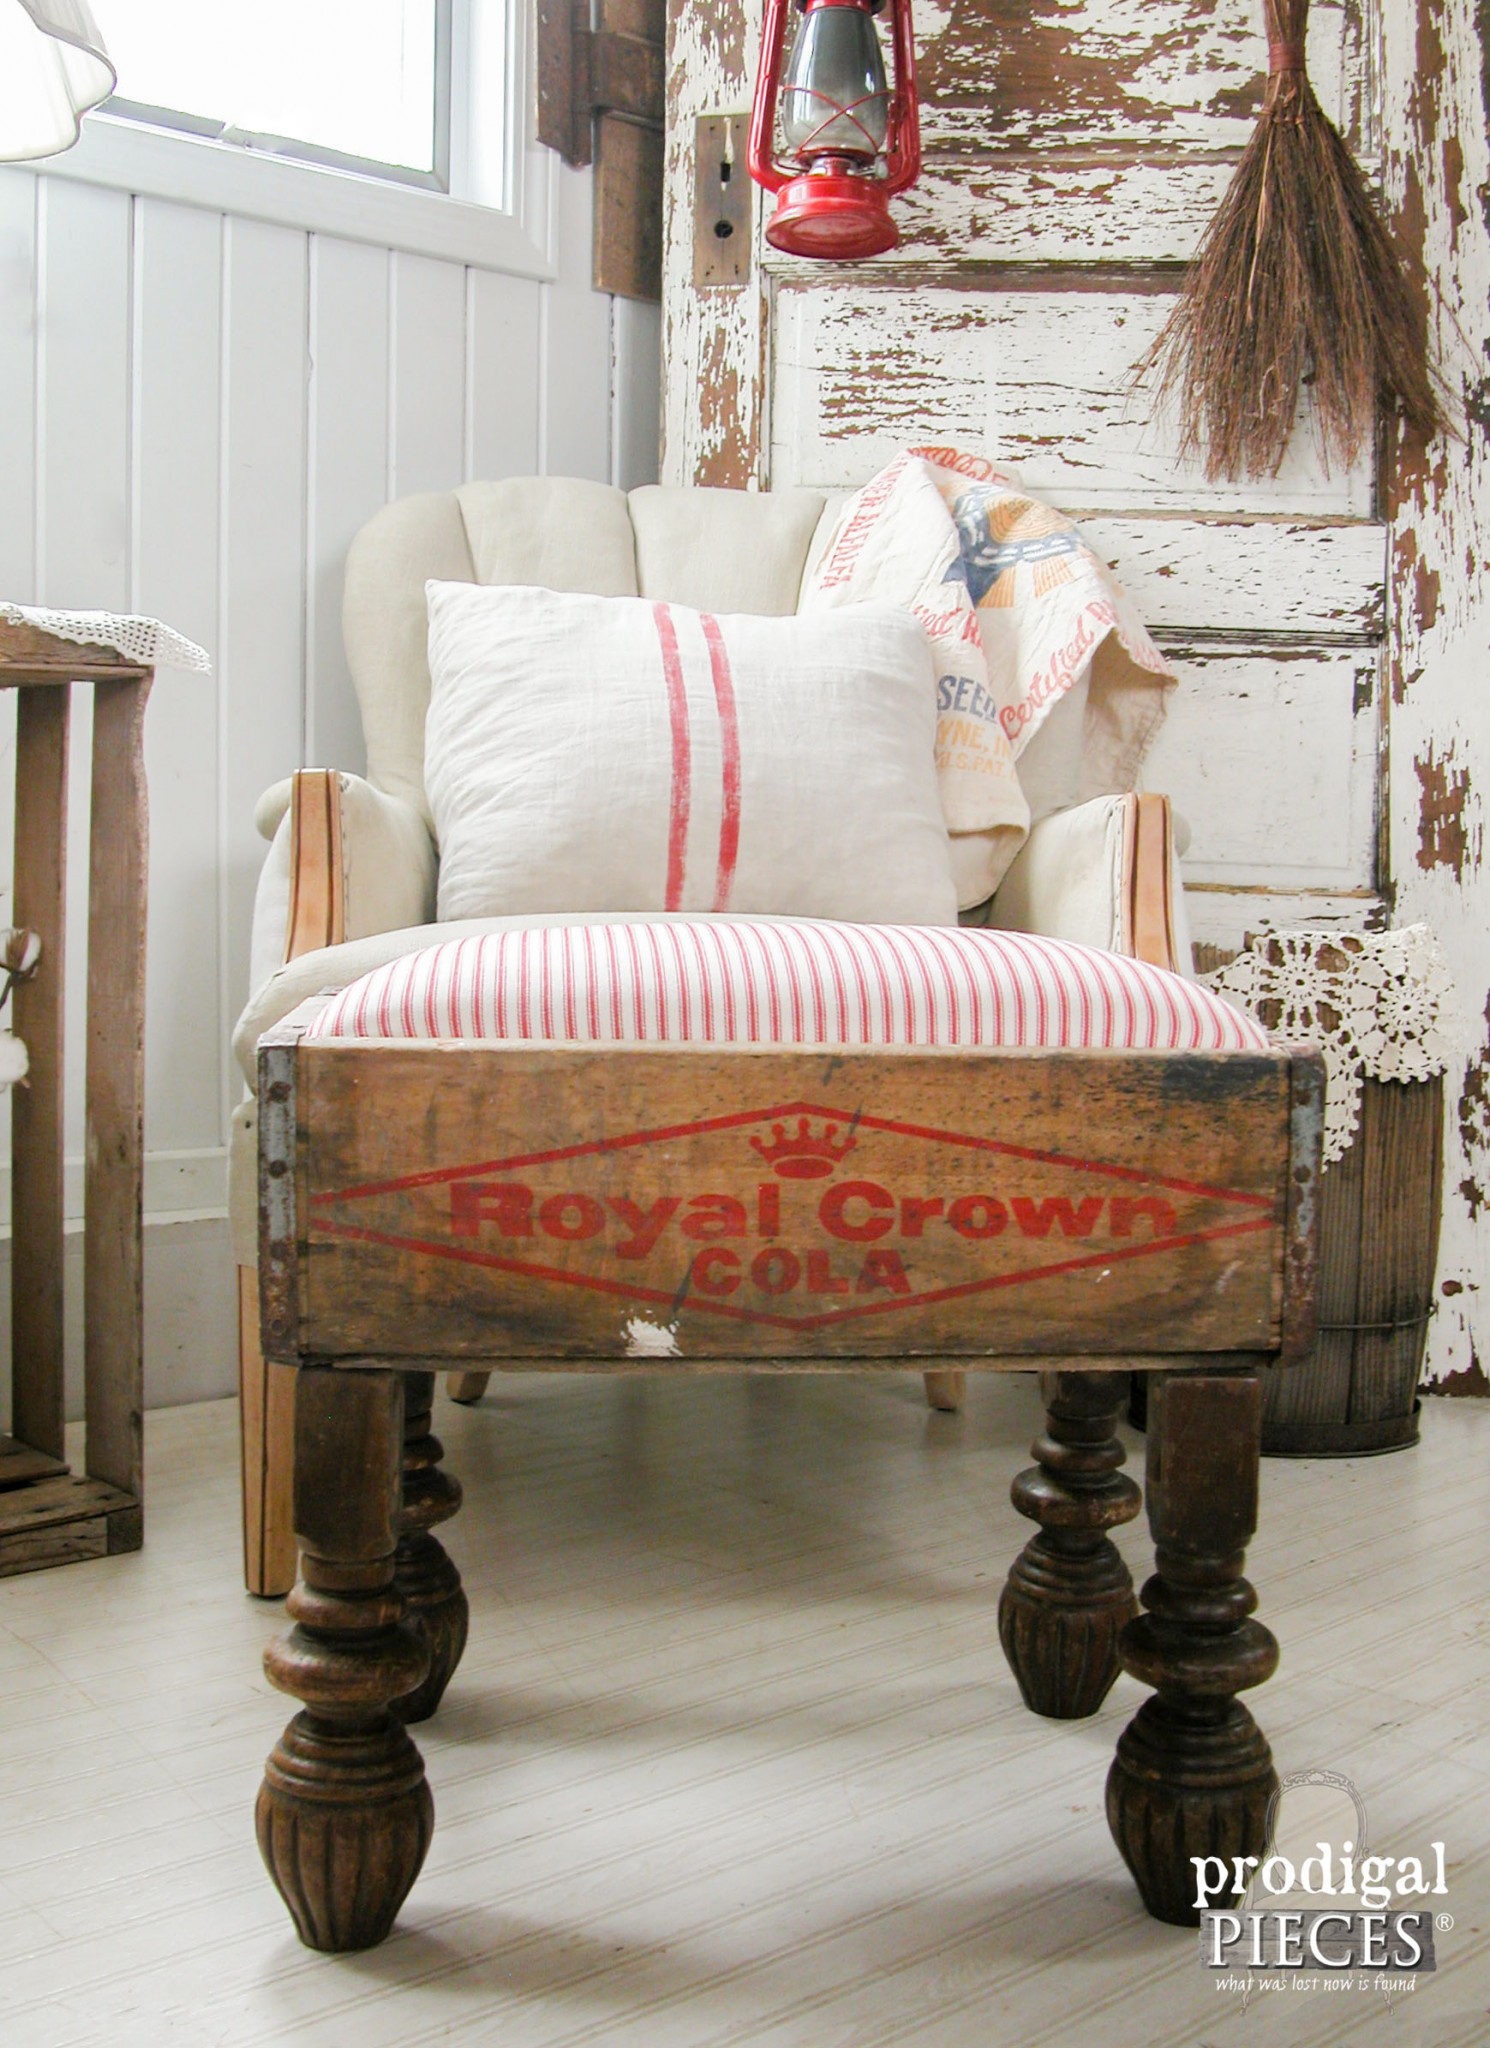 Royal Crown Cola Crate Foot Stool by Prodigal Pieces | www.prodigalpieces.com